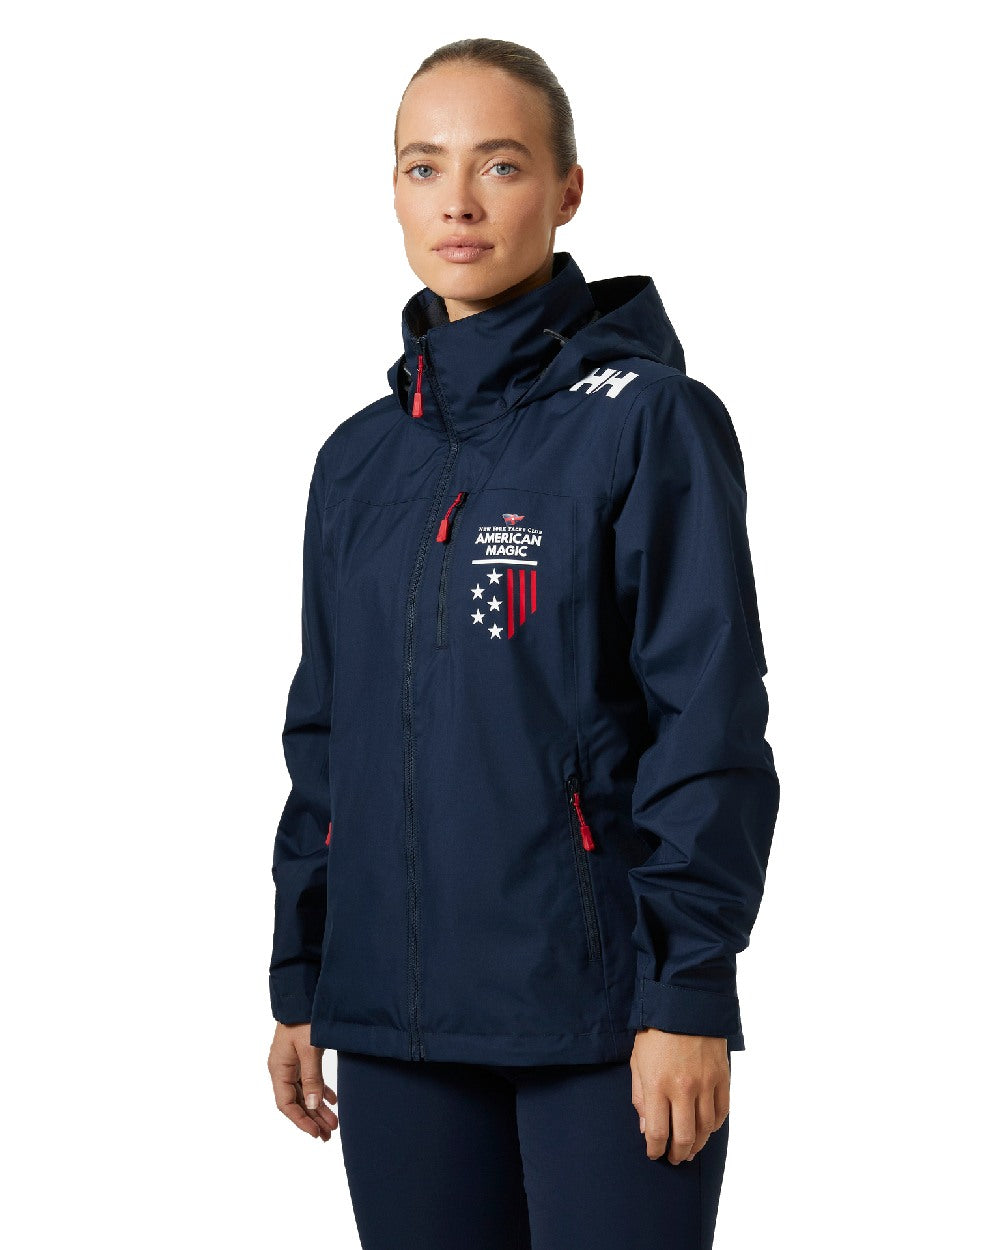 Navy coloured Helly Hansen Womens American Magic Crew Hooded Jacket 2.0 on white background 